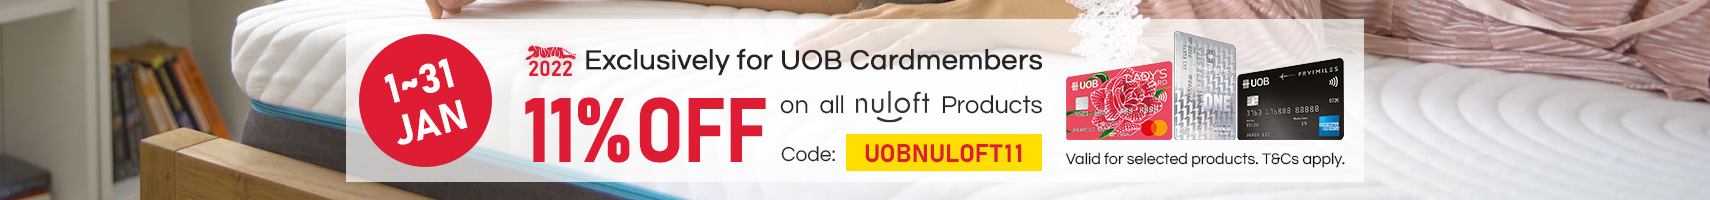 Exclusive Nuloft Offers for UOB Cardmembers